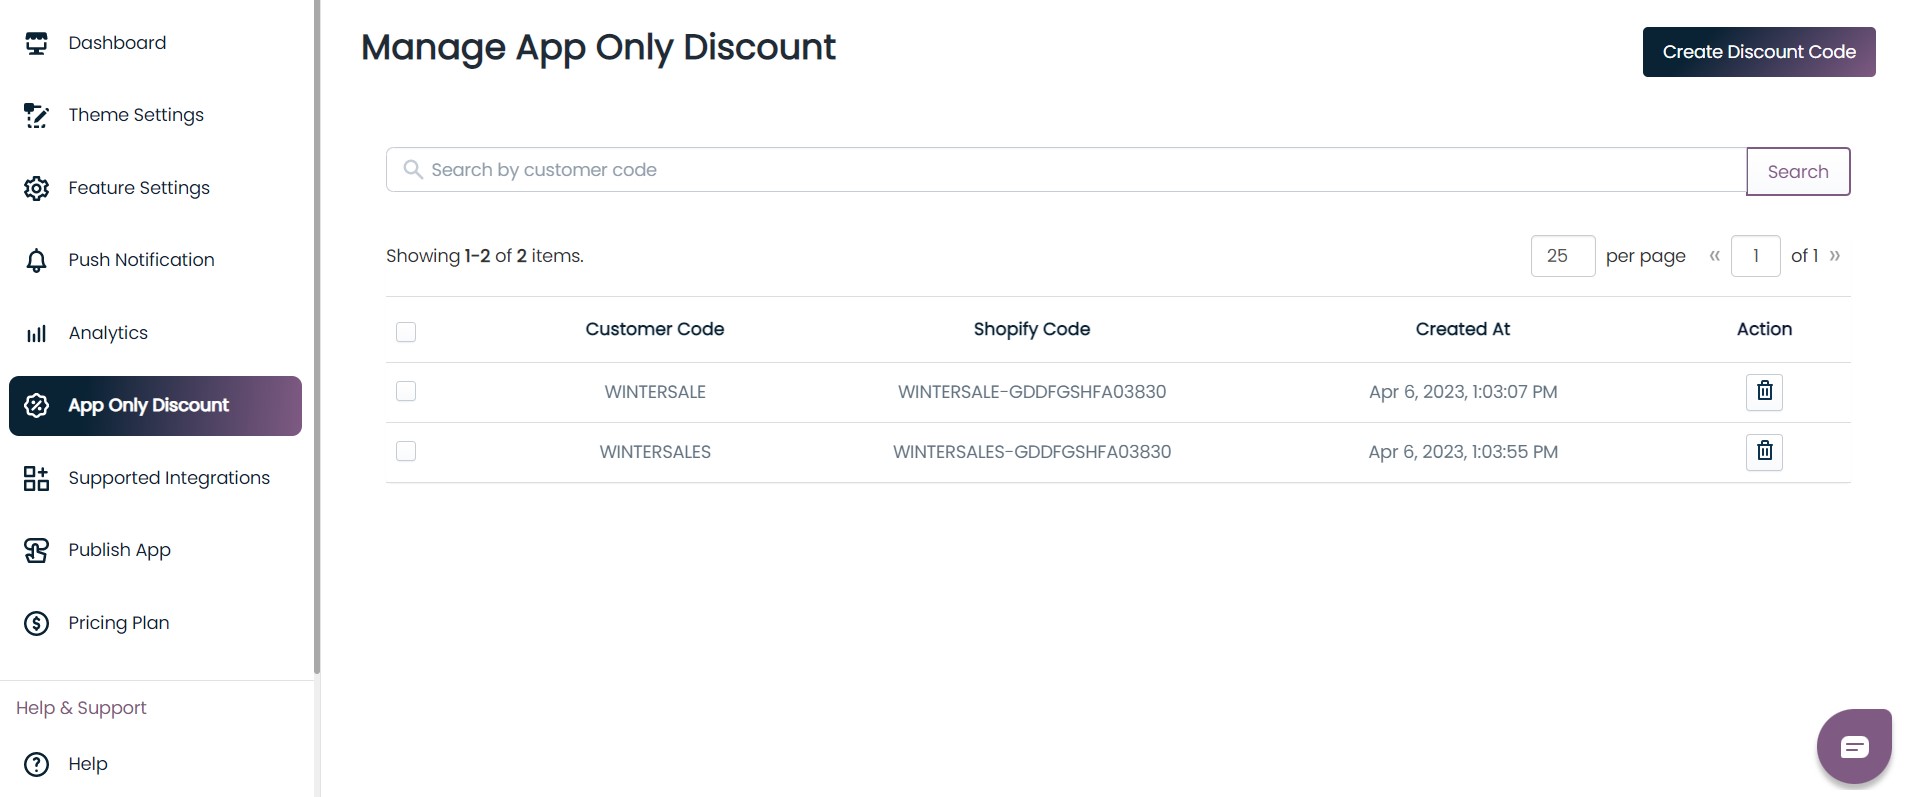 app-only-discount-dashboard